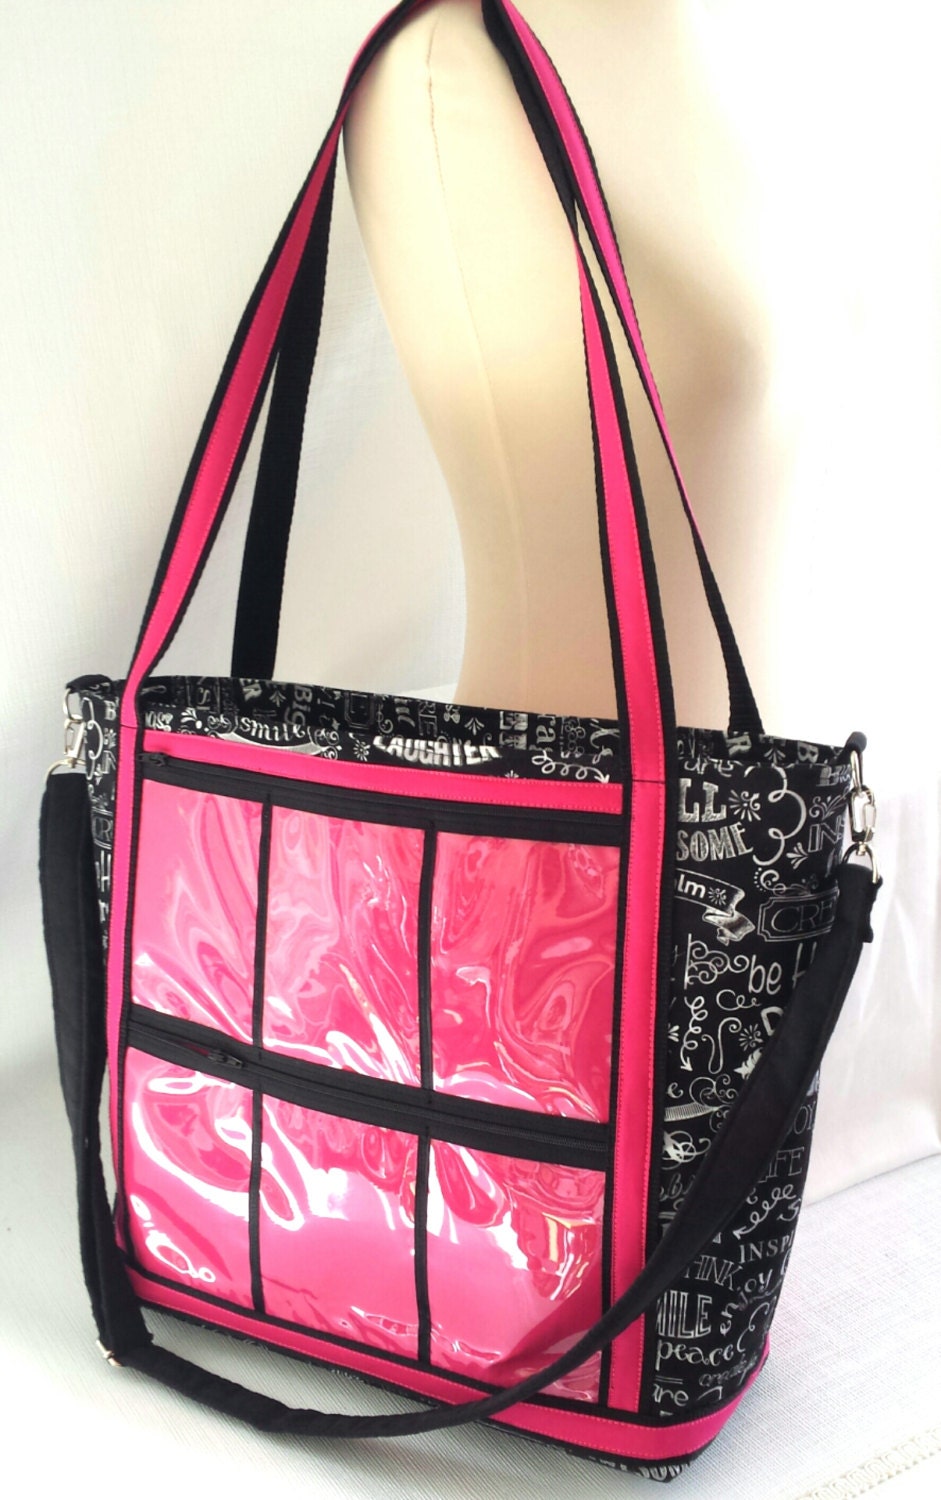 Direct sales reps consultant catalogue display tote bag.